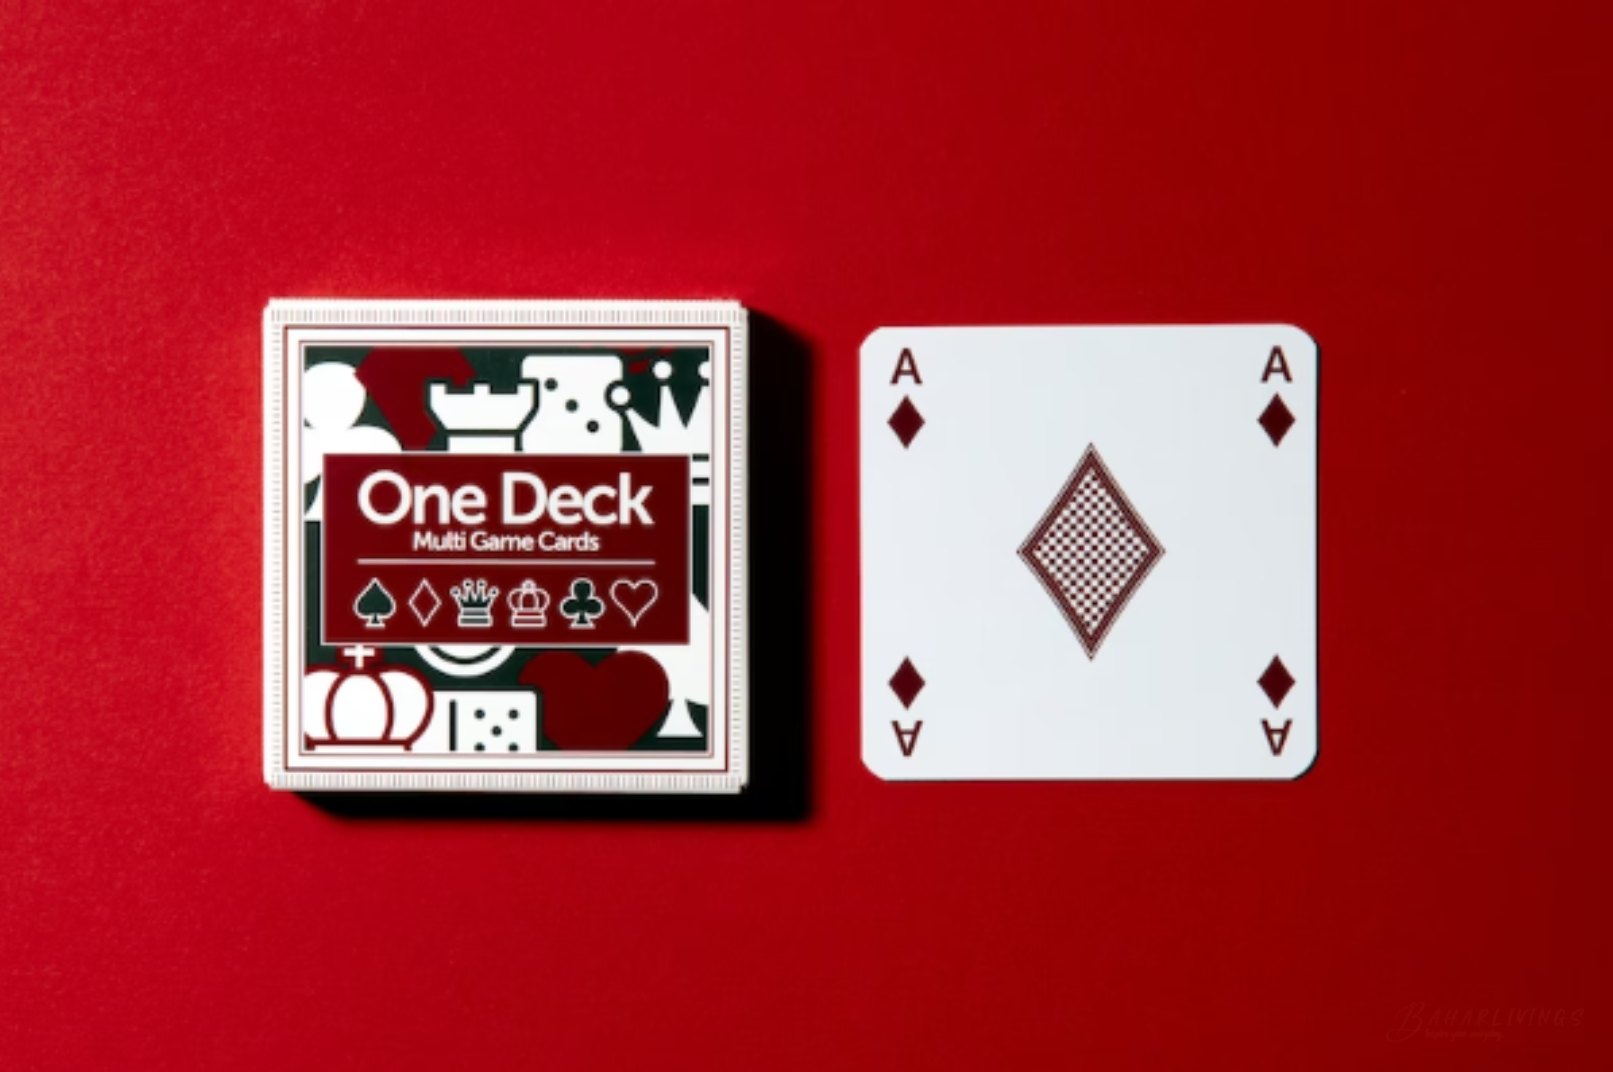 Card deck with symbols for various games, perfect for game nights with friends.